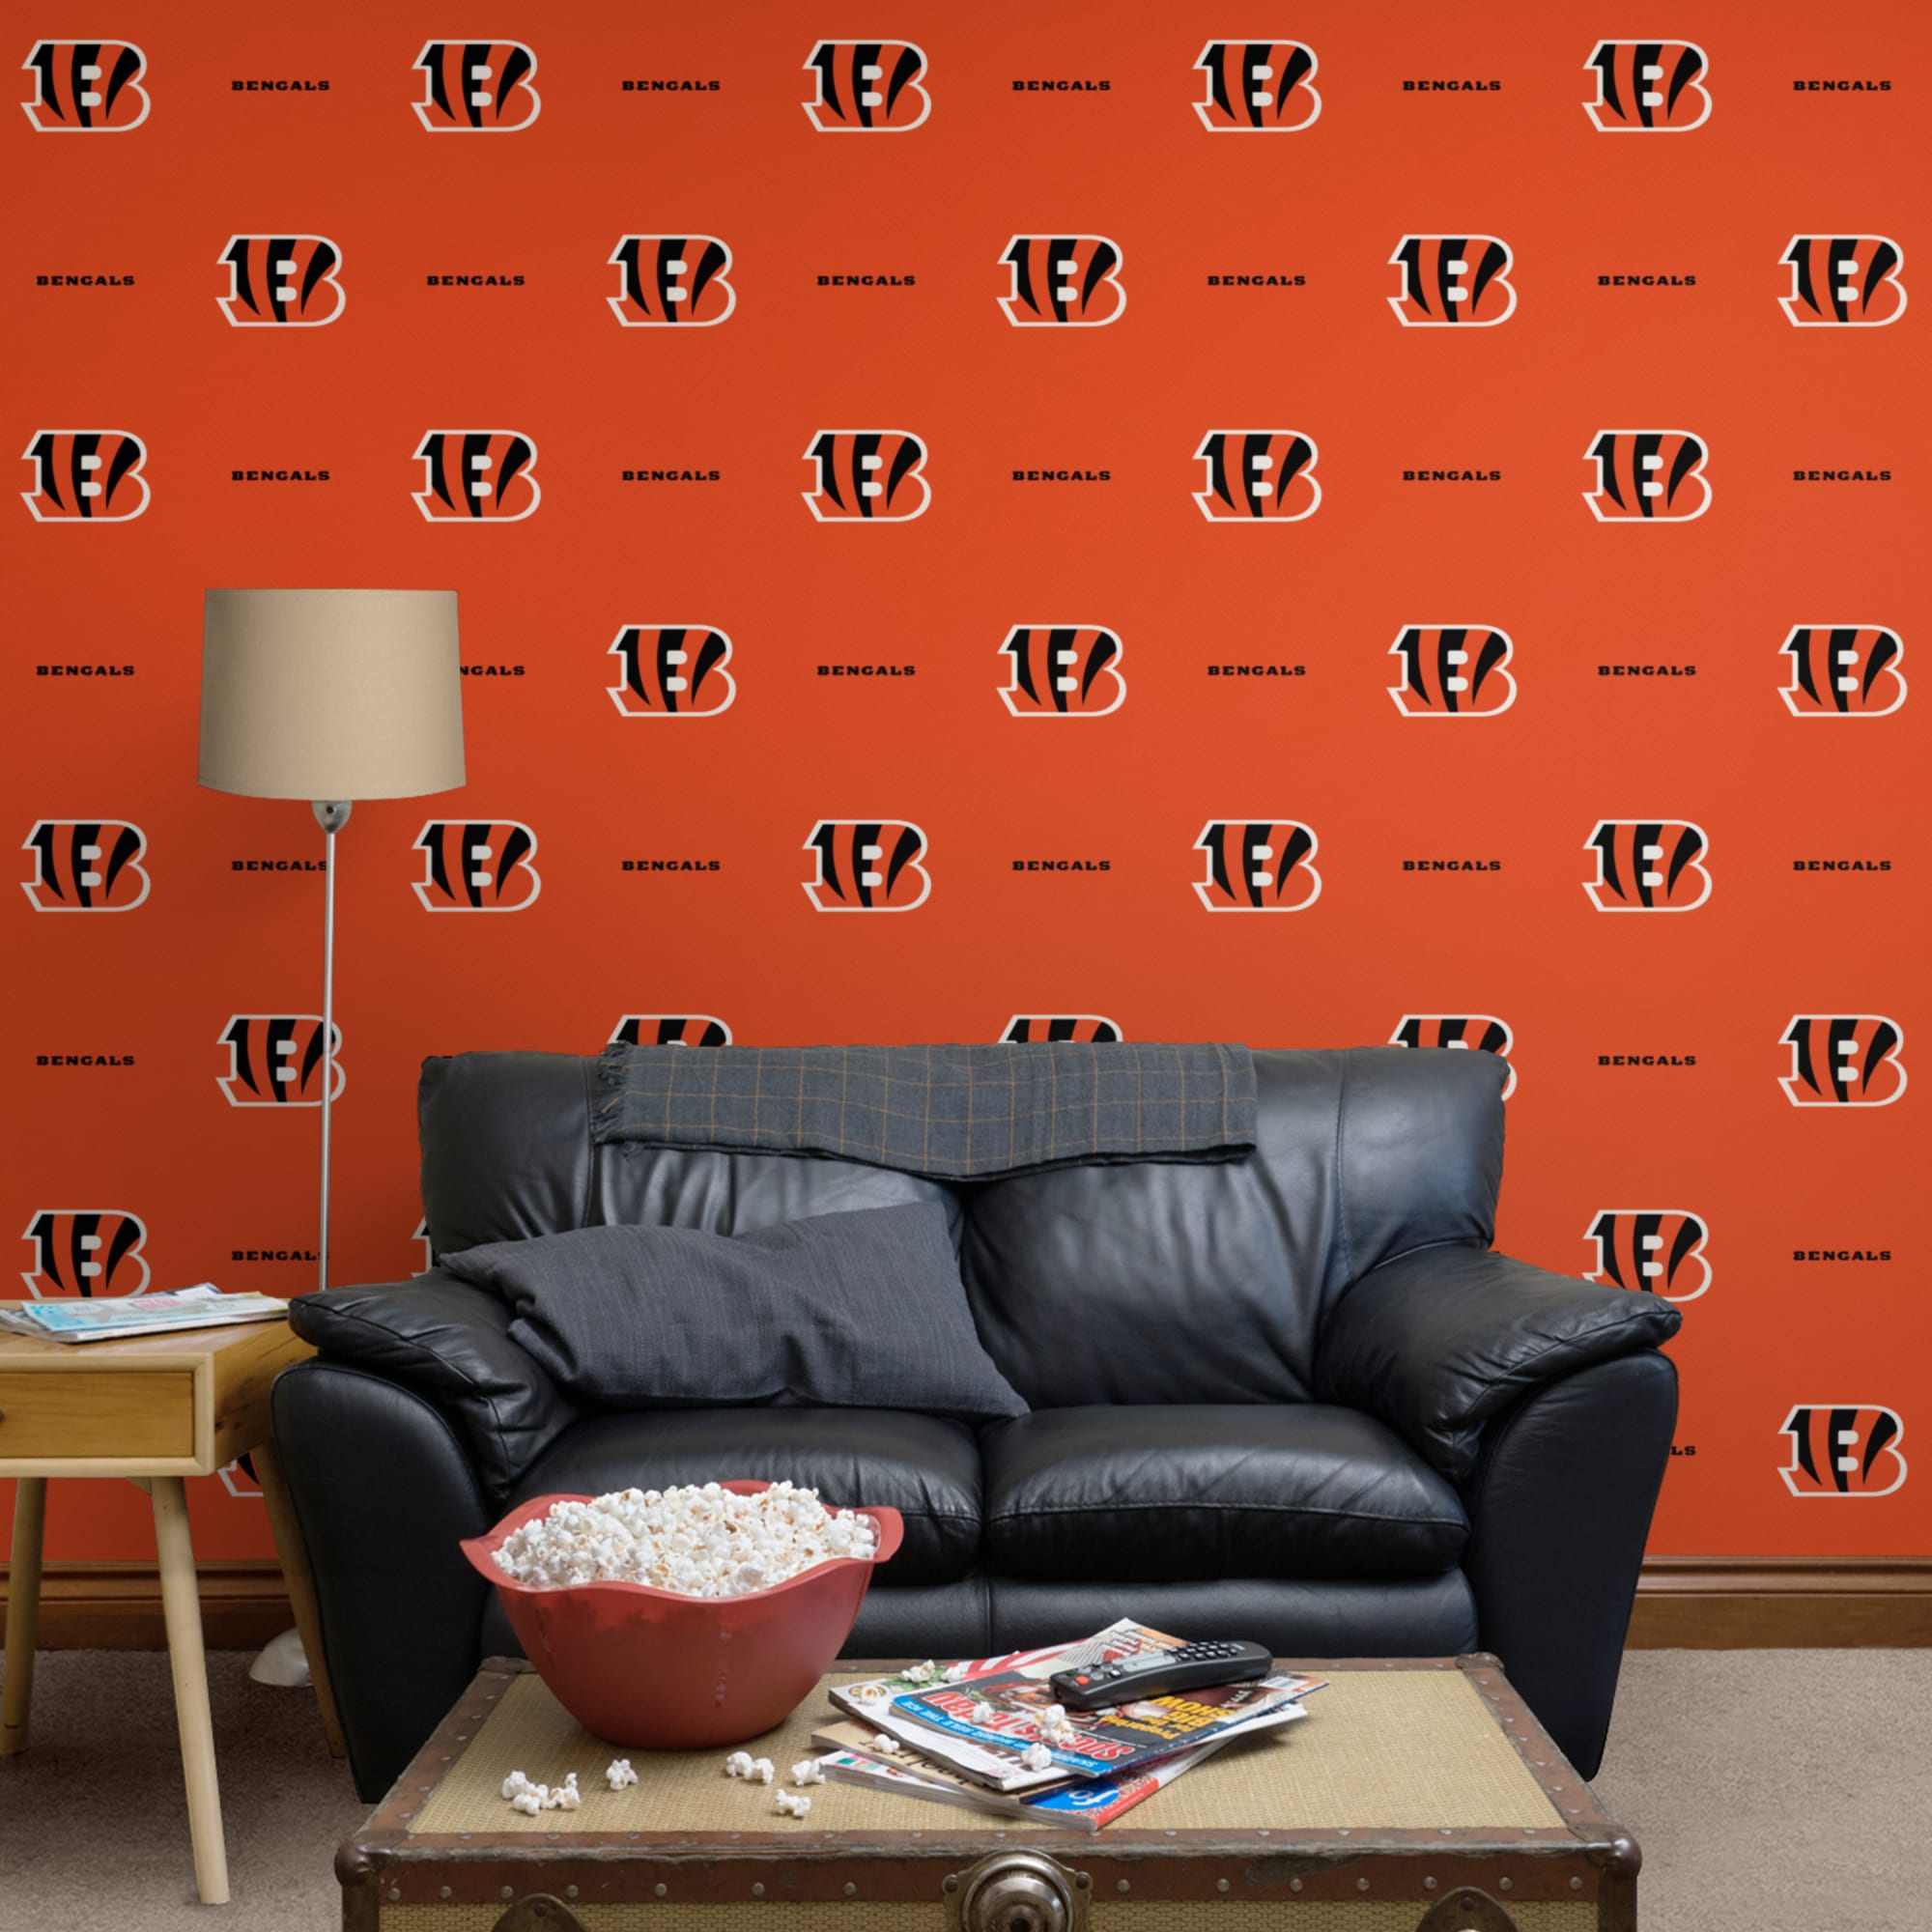 Cincinnati Bengals: Line Pattern - Officially Licensed NFL Removable Wallpaper 12" x 12" Sample by Fathead | 100% Vinyl